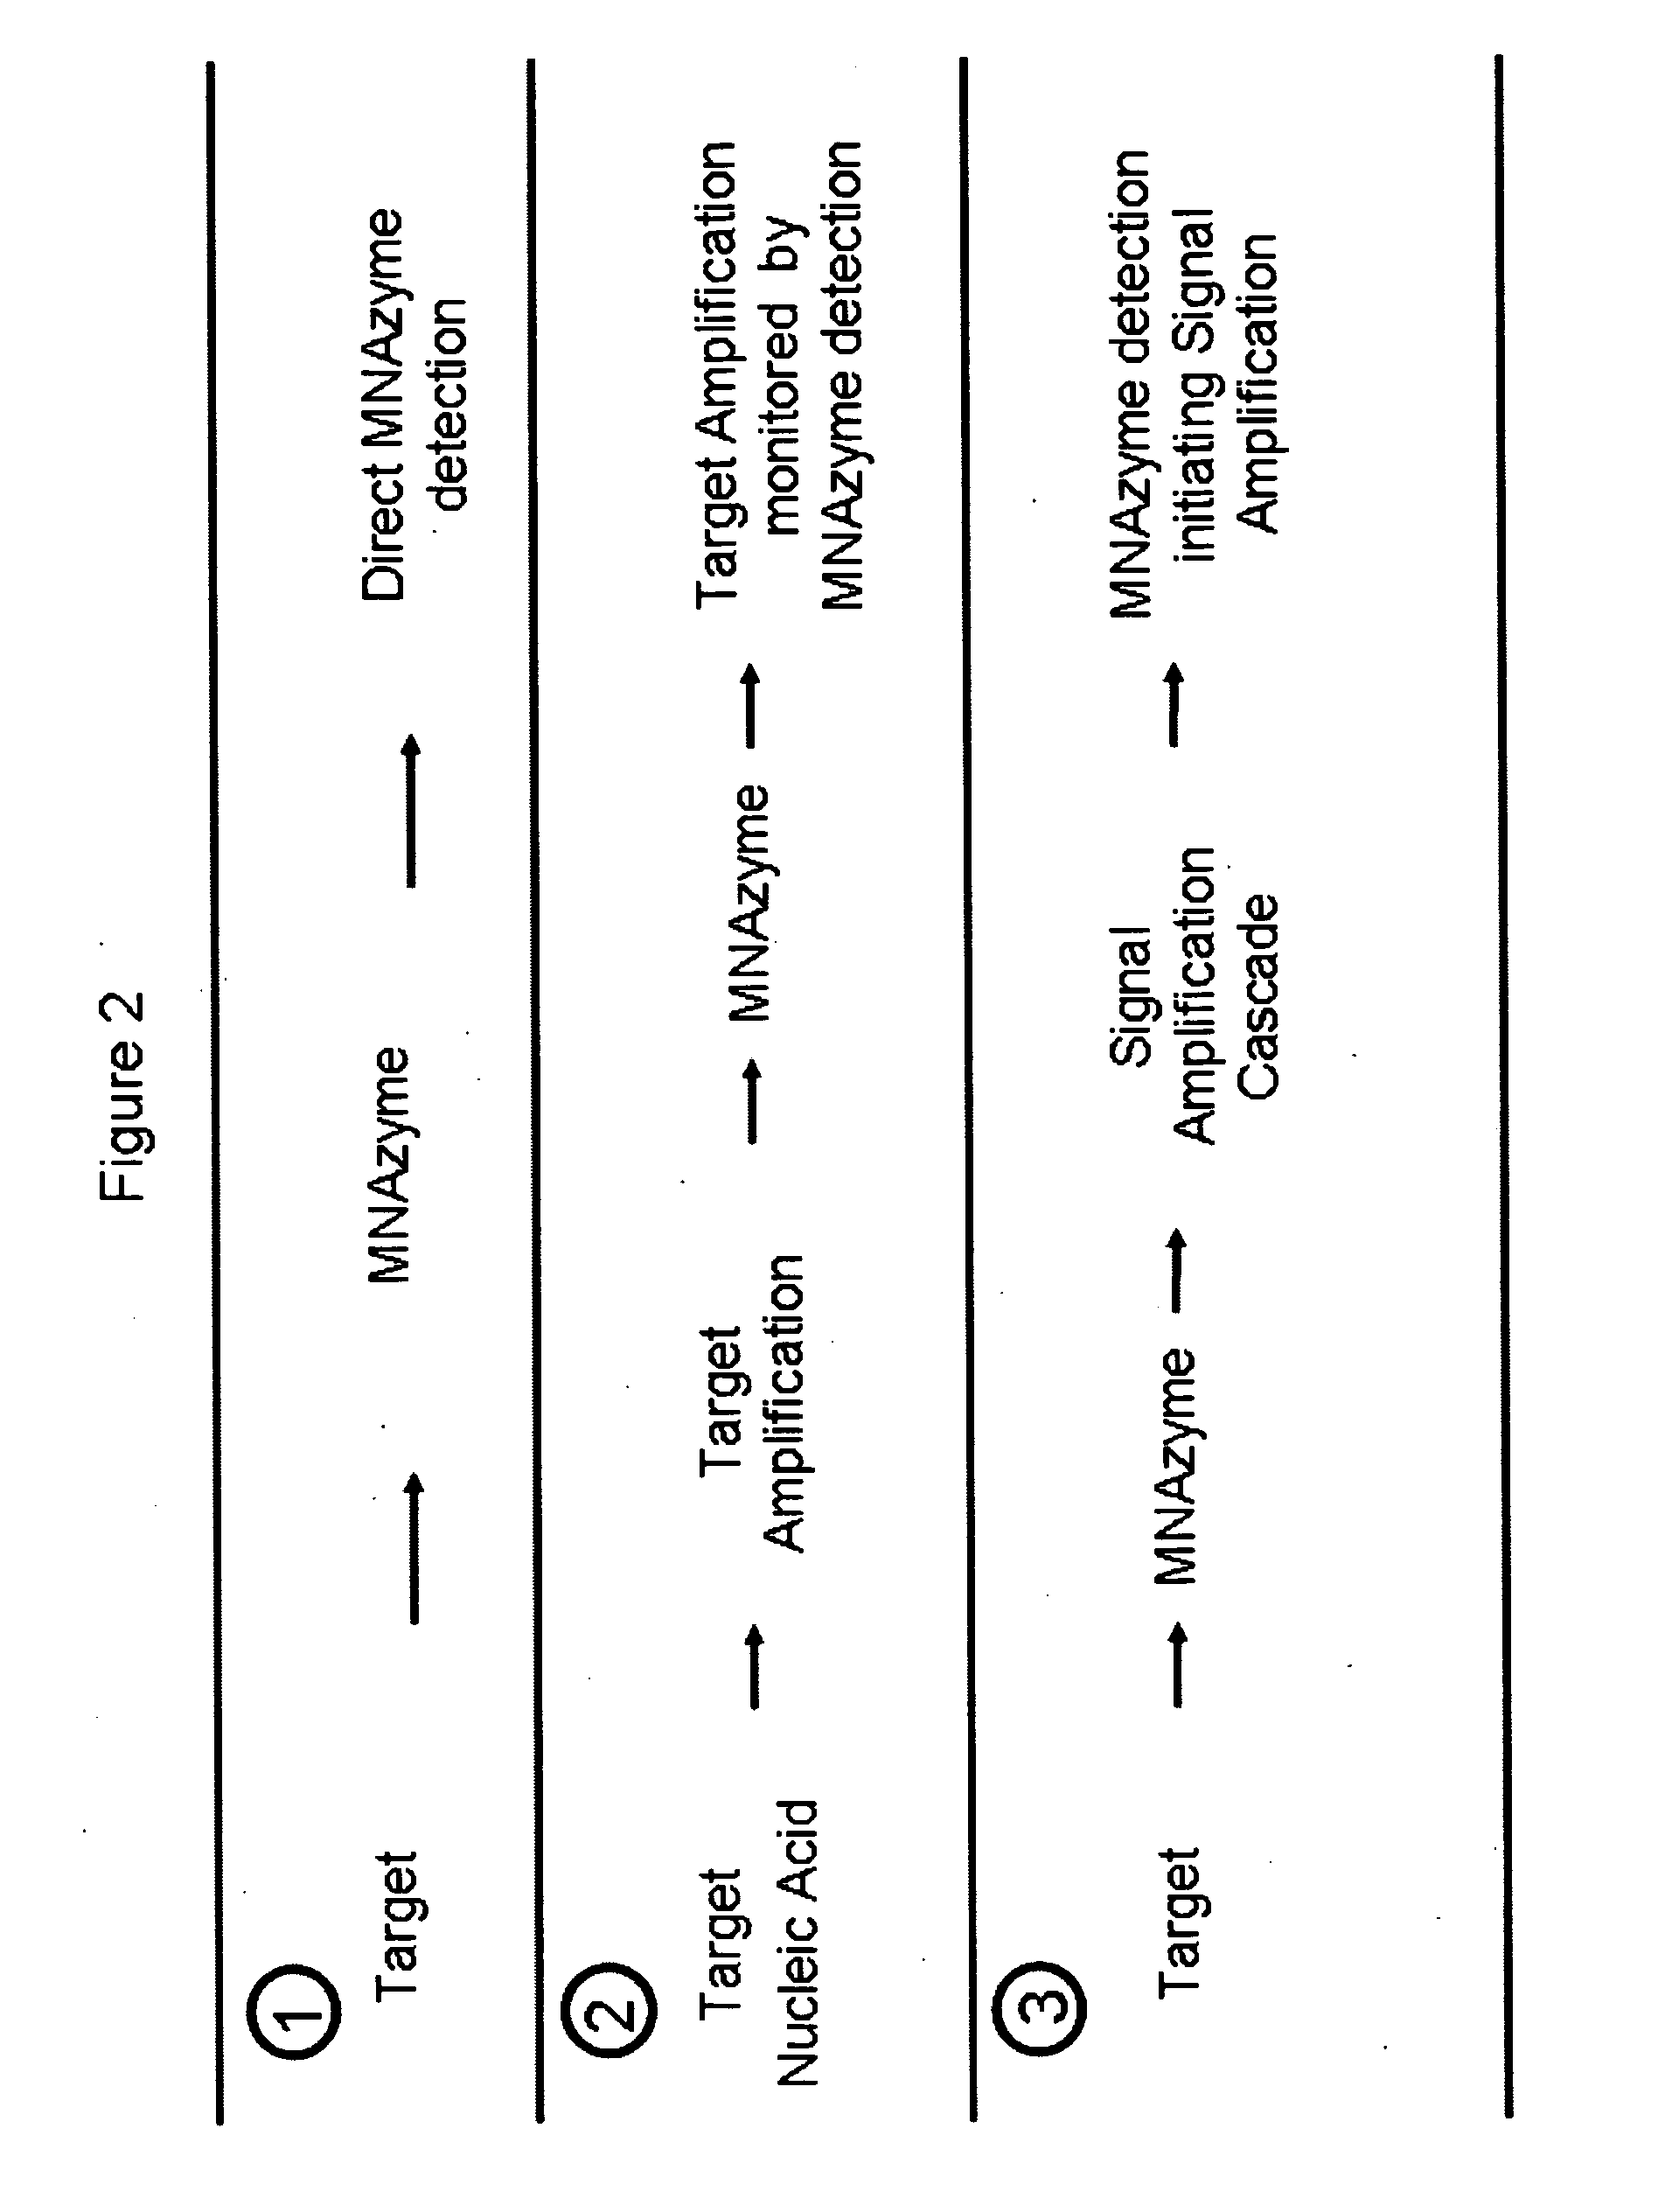 Multicomponent nucleic acid enzymes and methods for their use